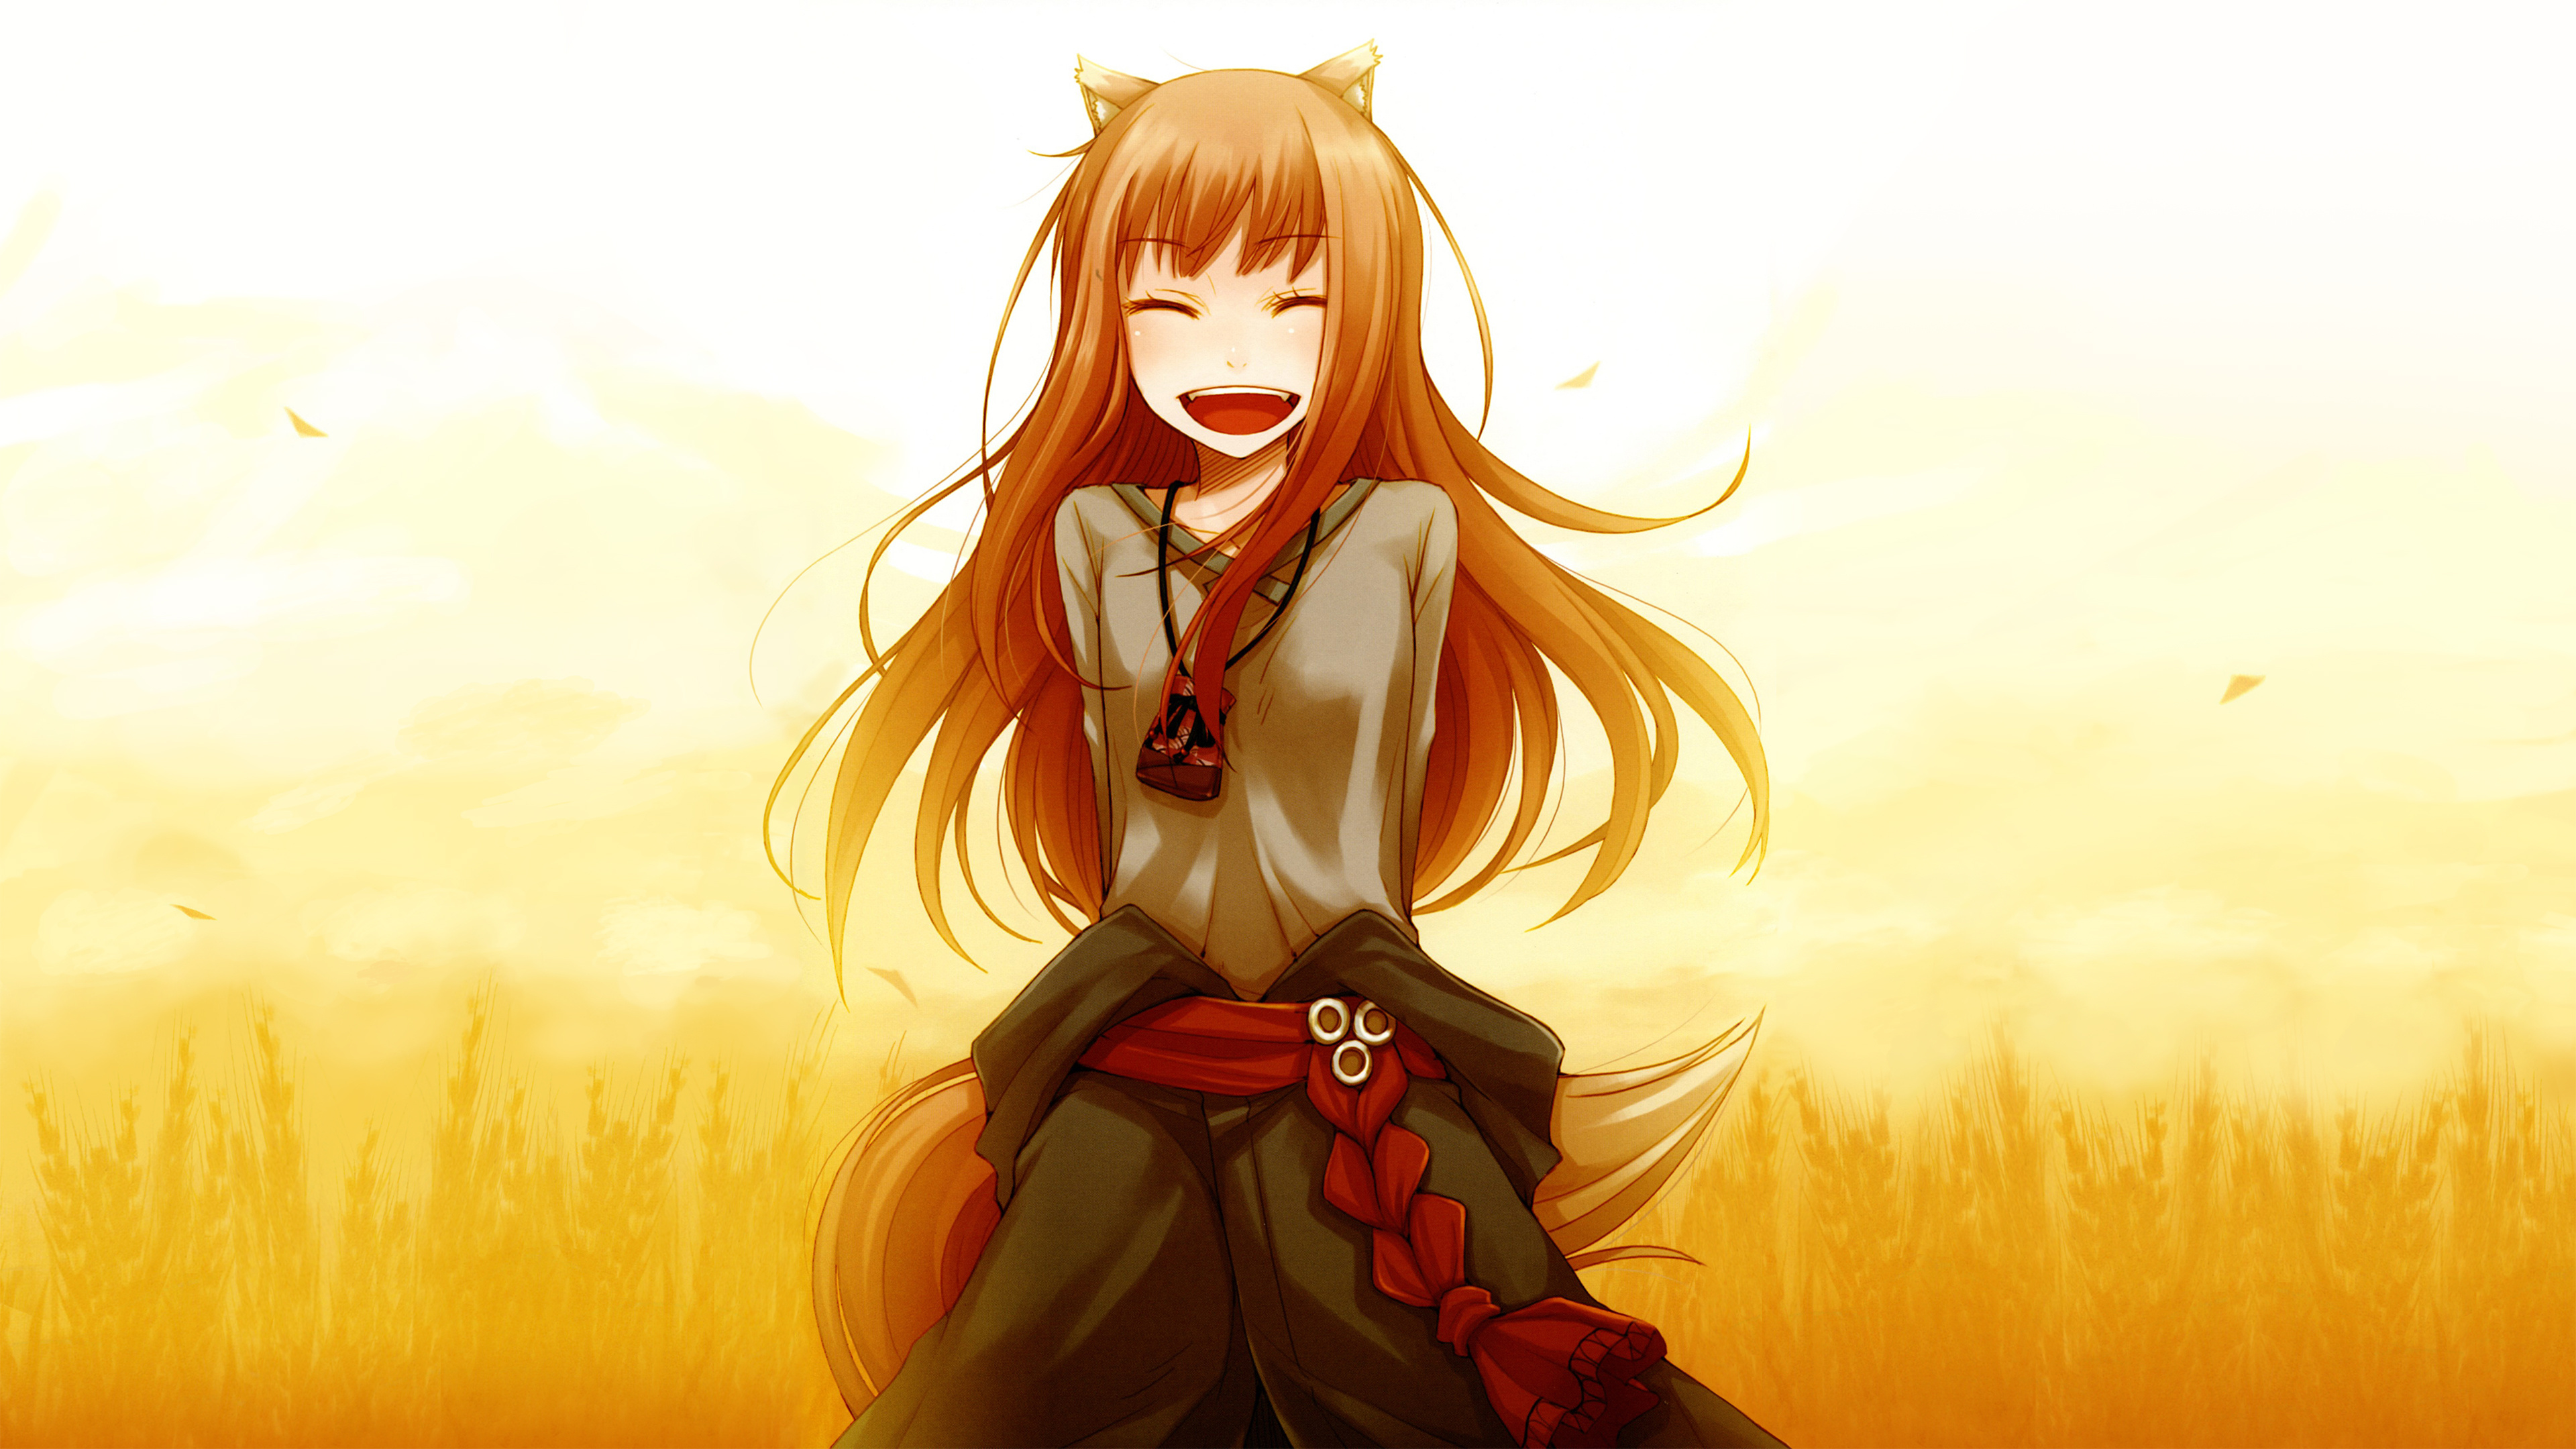 Spice and Wolf (Anime): Manga, Arriving at Pasloe, Settled down. 3840x2160 4K Wallpaper.